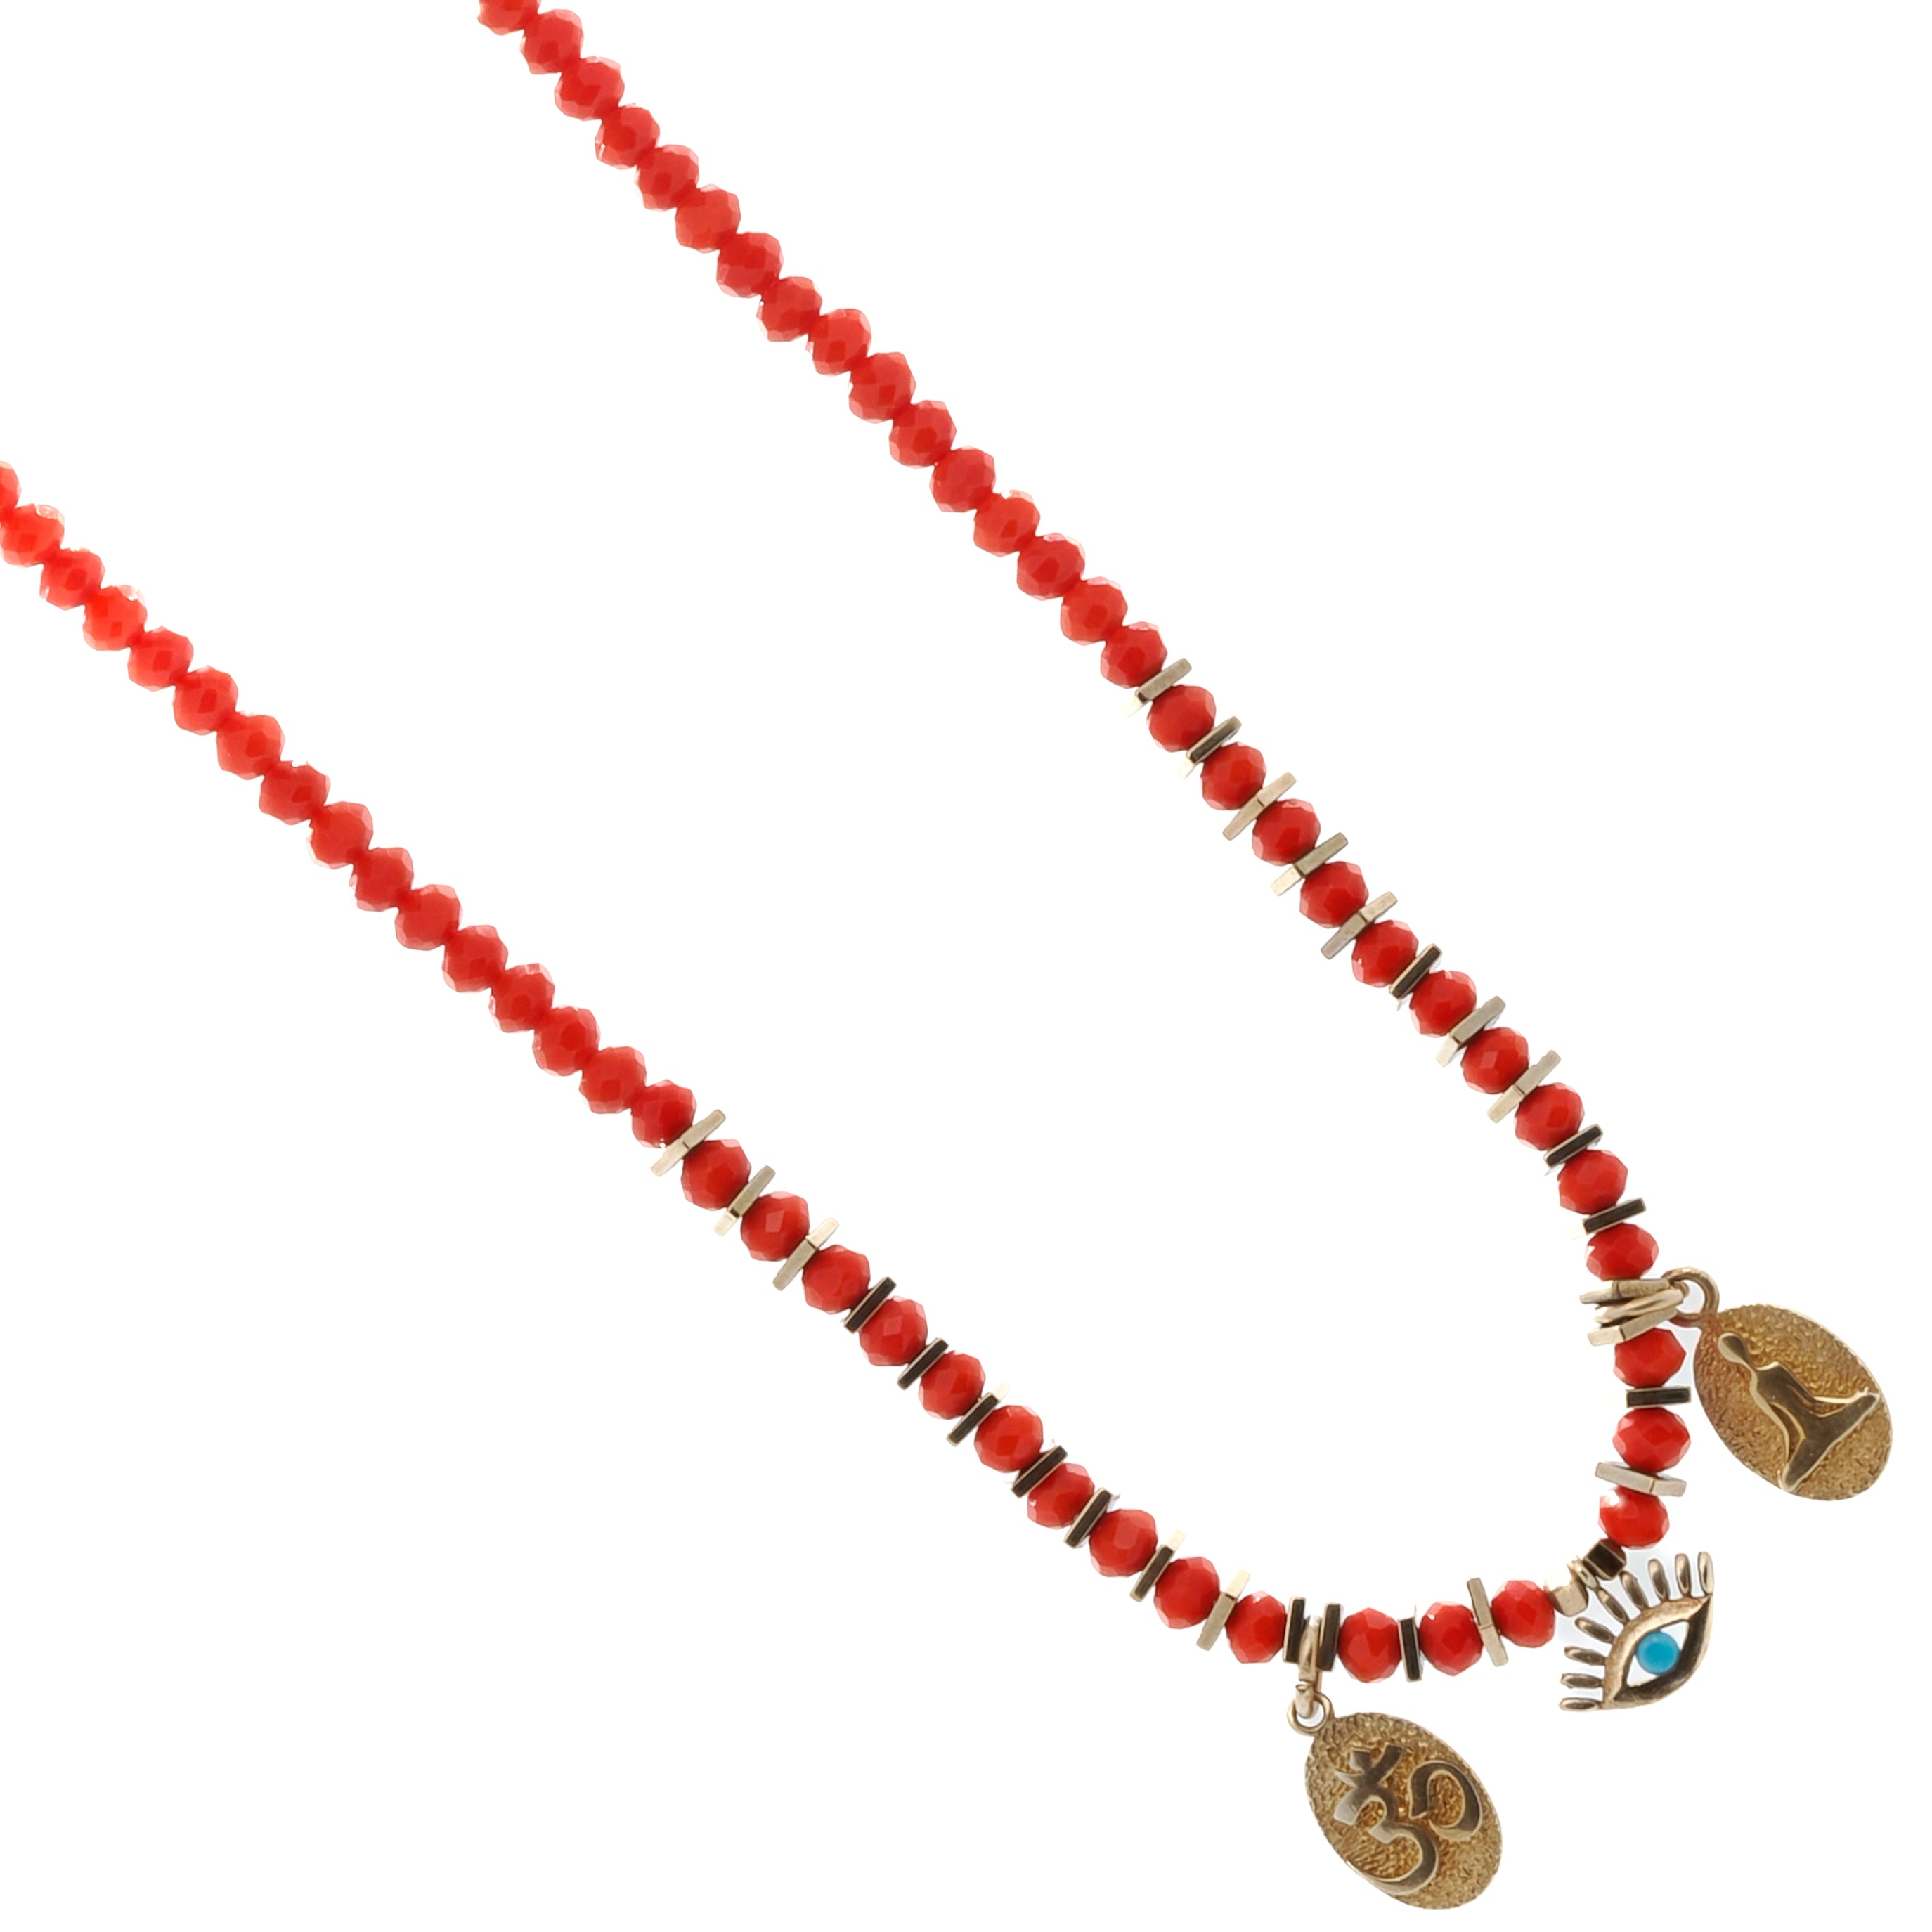 Invite good energy into your life with the Yoga Girl Choker Necklace's meaningful symbols.